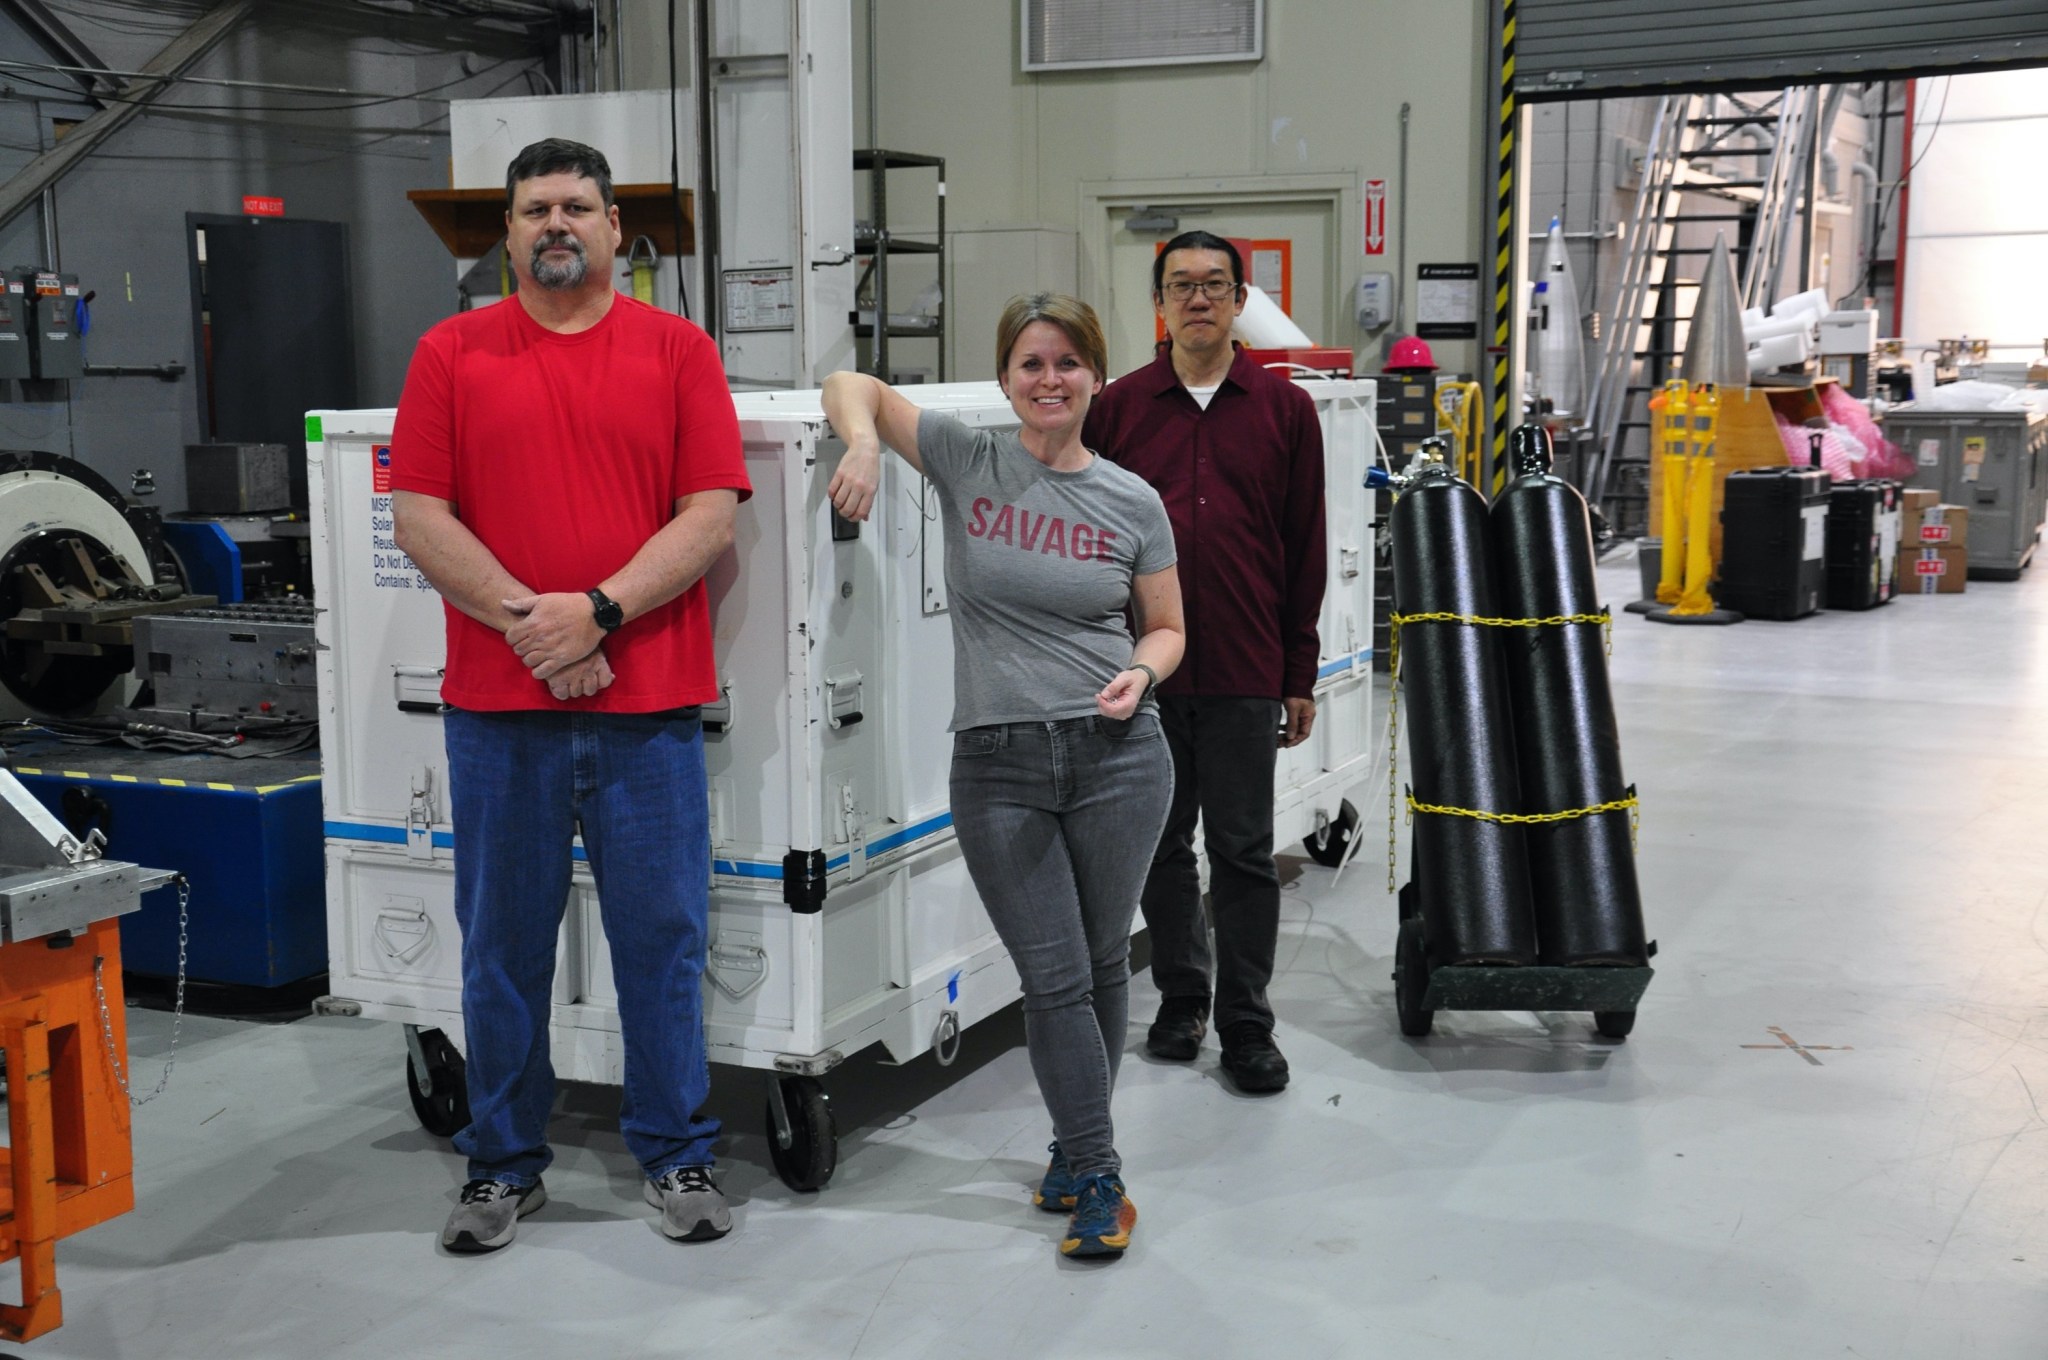 From left, NASA test engineer William Hogue, Hi-C principal investigator Sabrina Savage, and NASA systems scientist Ken Kobayashi stand in front of the Hi-C flare instrument section after it has been packaged and prepared for shipping from White Sands to Alaska.